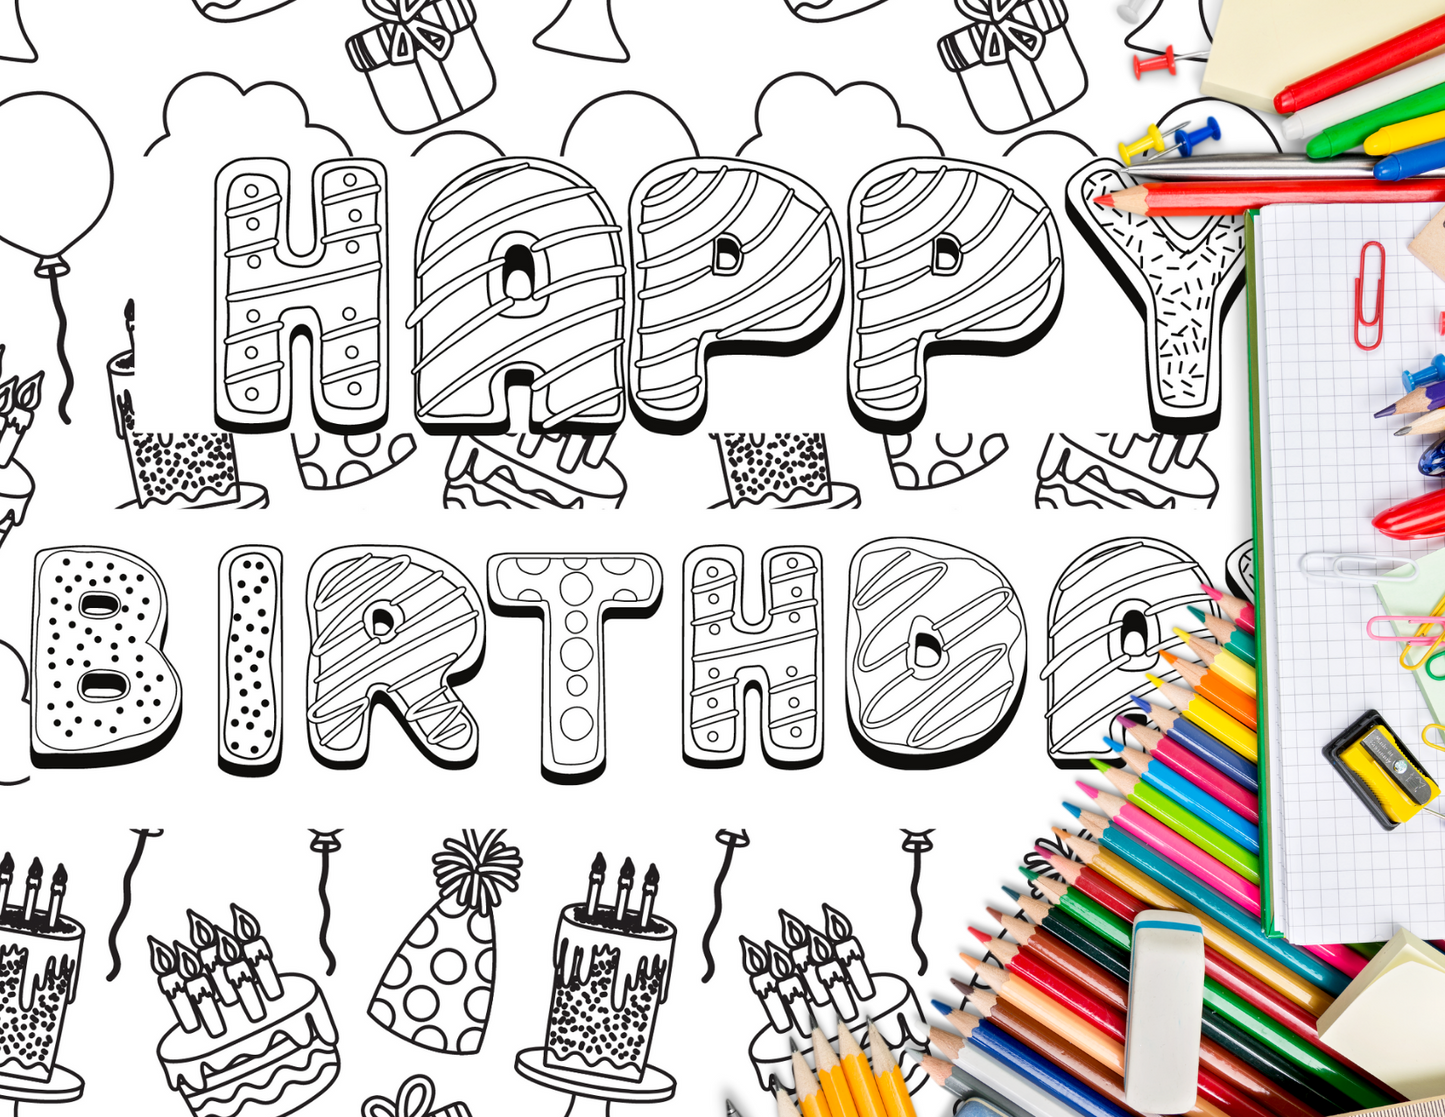 Elevate your child's birthday party with our 11"x17" Happy Birthday Coloring Place Mats! 🌈 Featuring a vibrant design, these durable mats offer ample space for creativity. Educational and entertaining, they make cleanup a breeze and double as delightful party favors. Order now for a stress-free, artistic celebration!